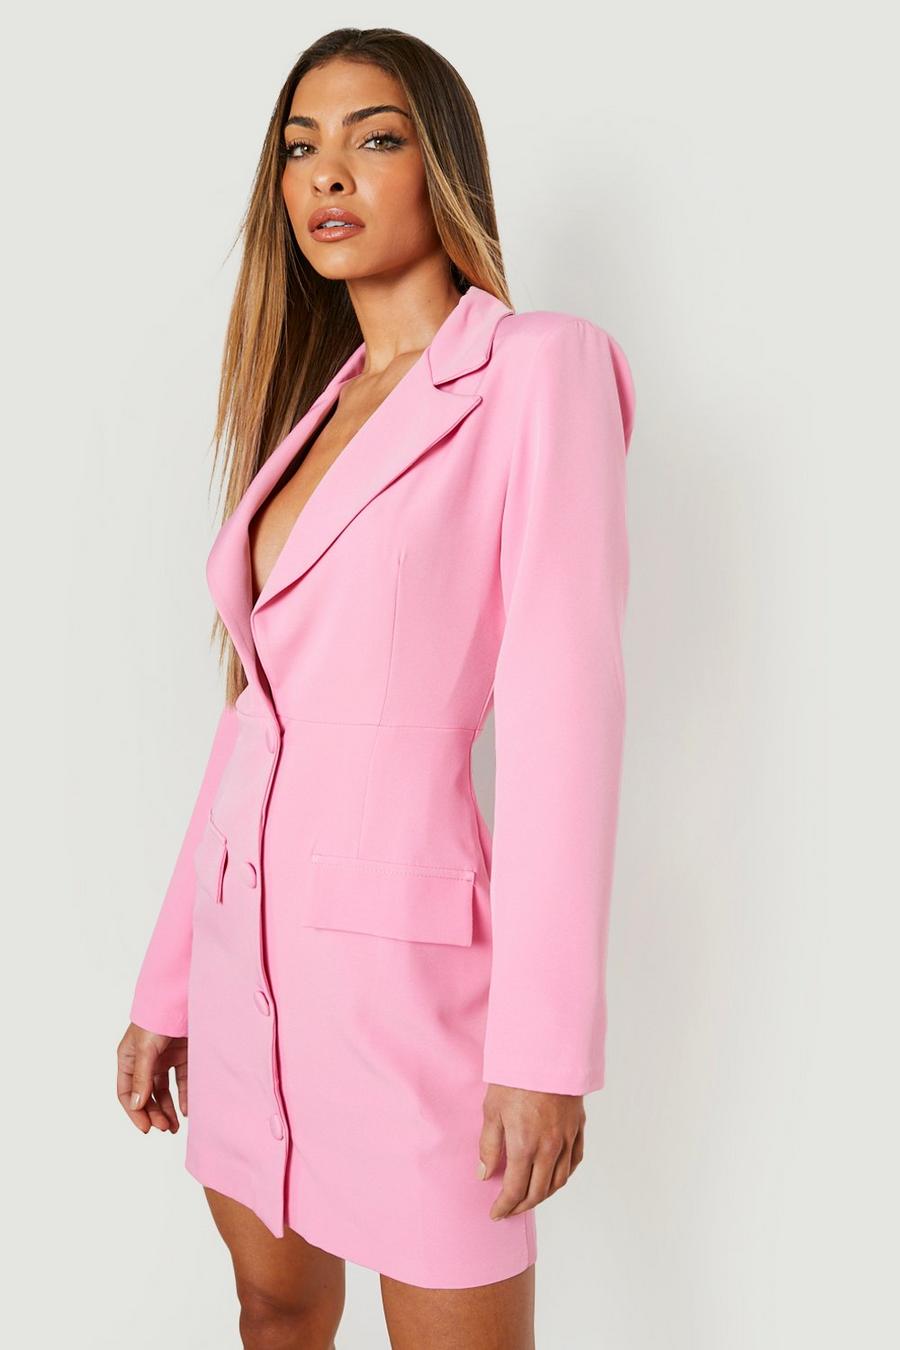 Candy pink Getailleerde Blazer Jurk Met Cut Out Taille Detail image number 1